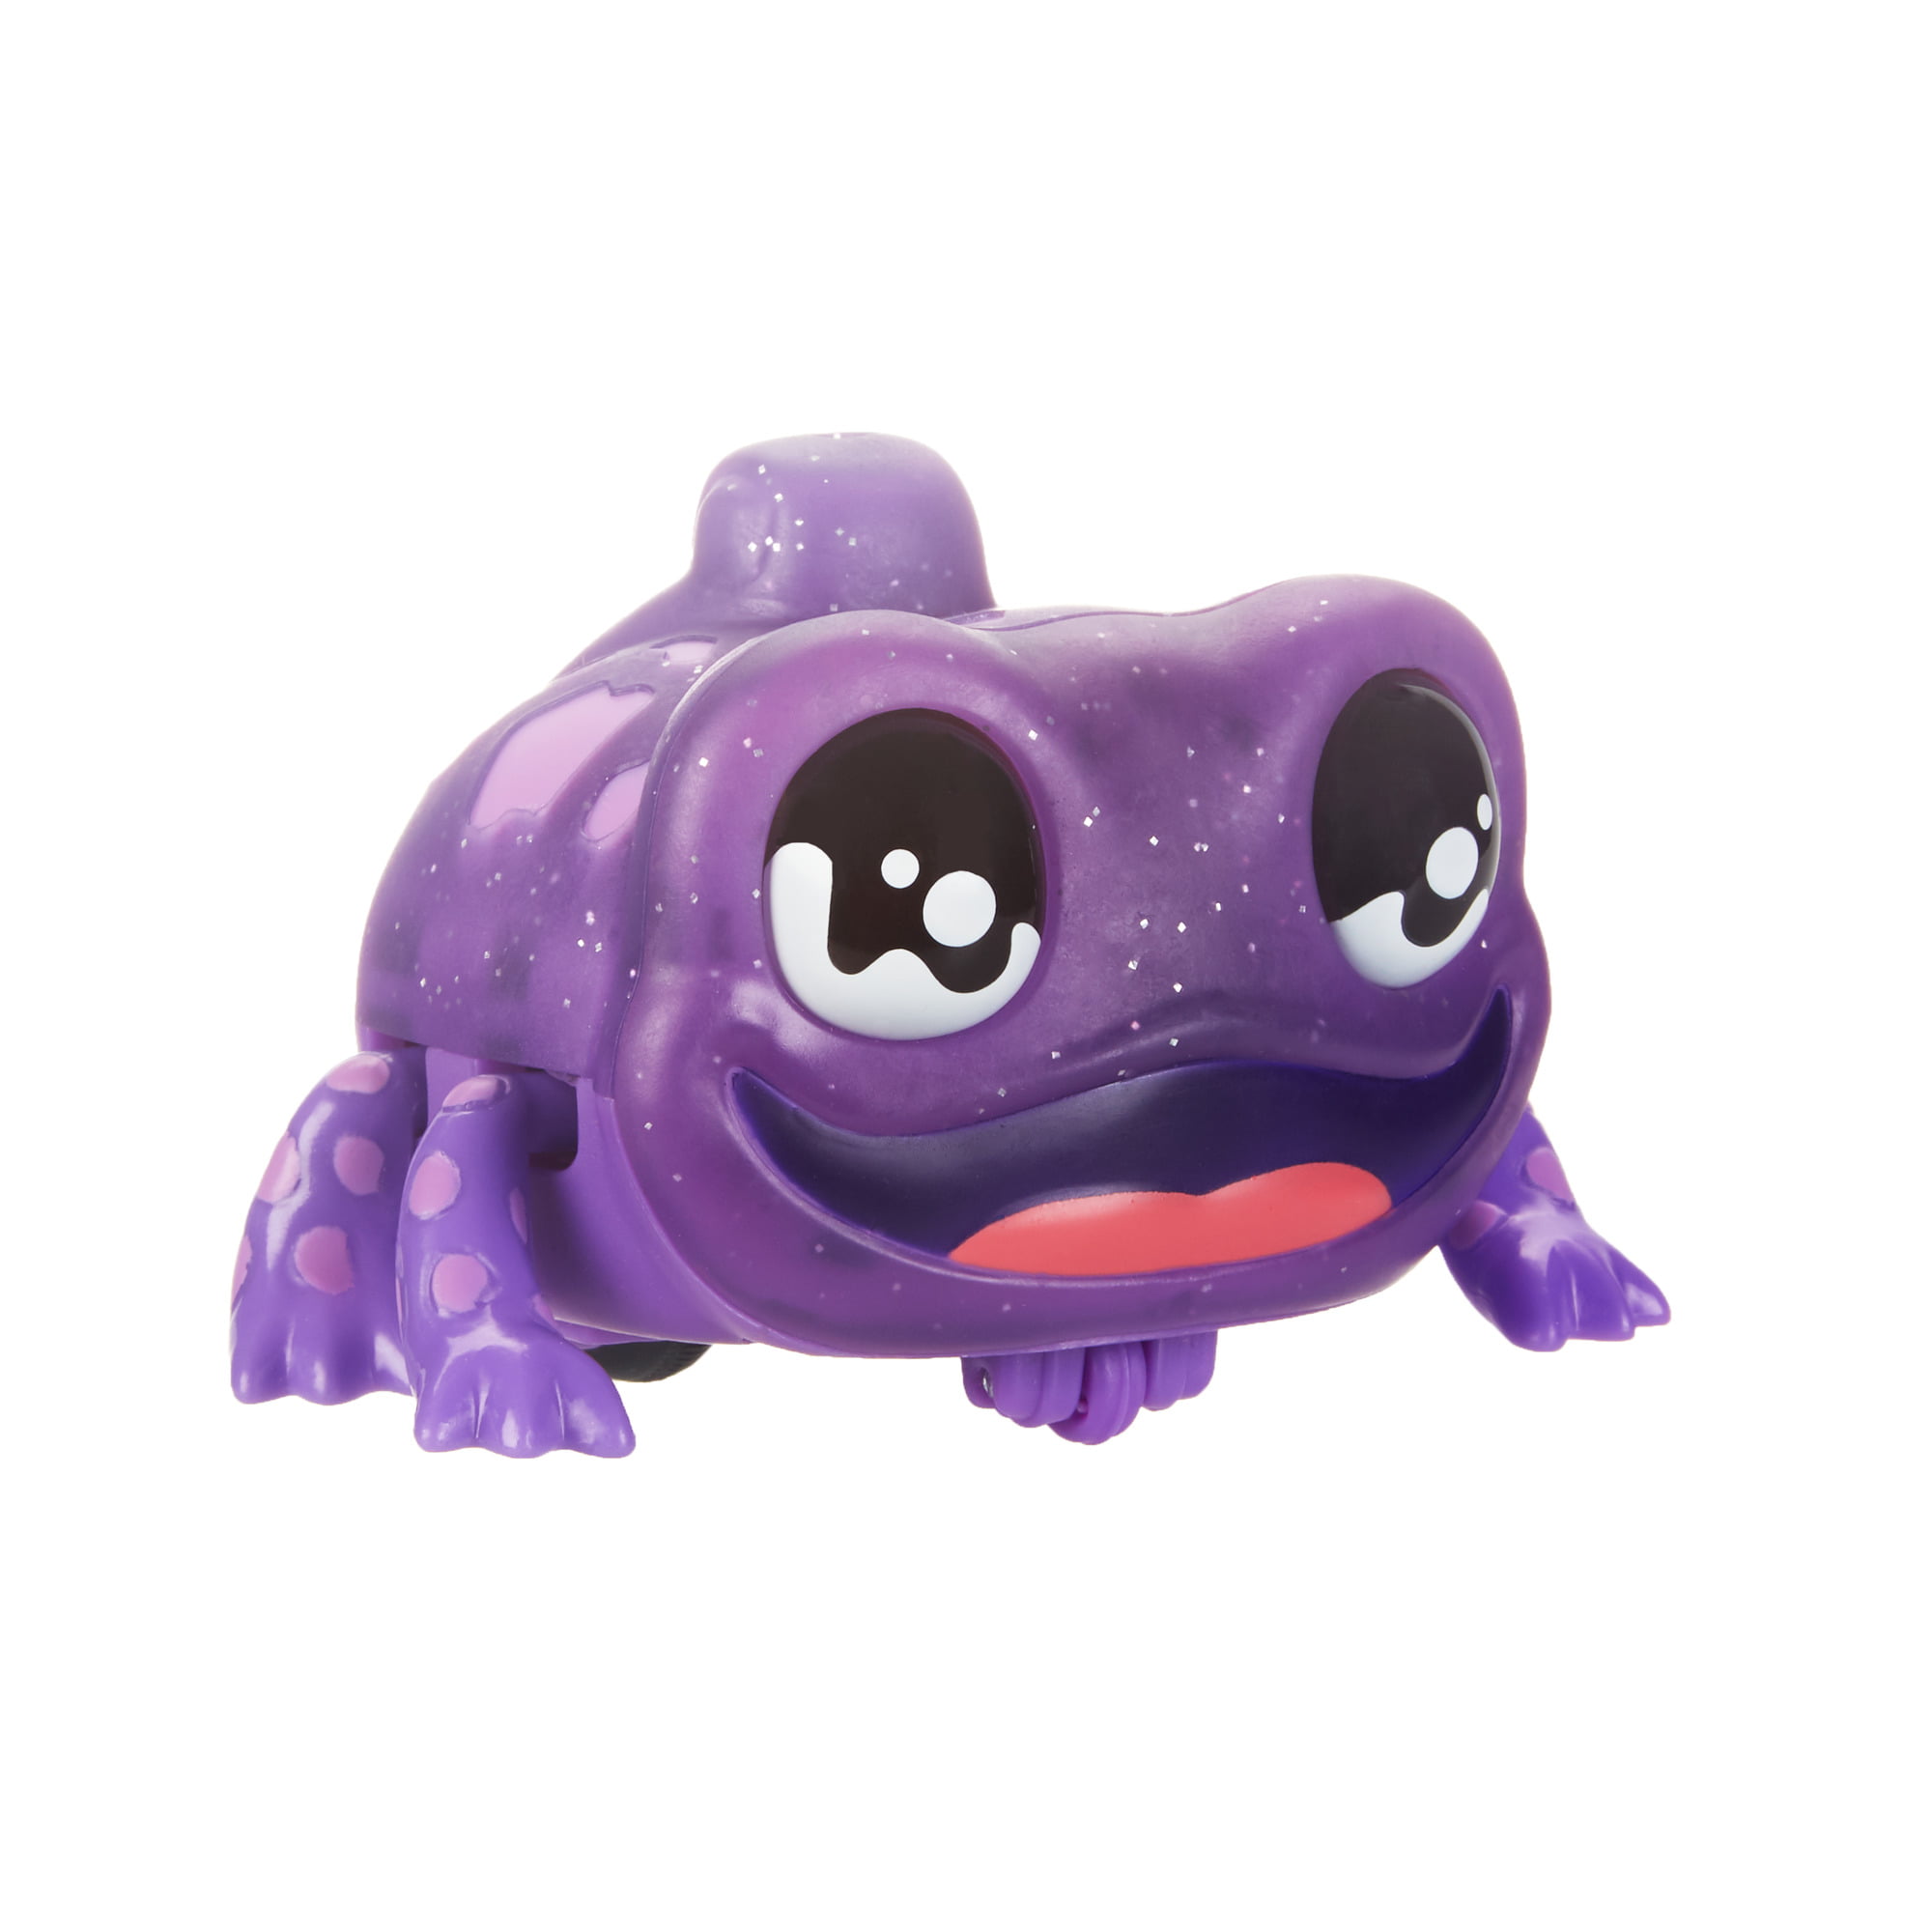 Purple Frizz; Voice-Activated Frog Pet Toy Animal Details about   Yellies 